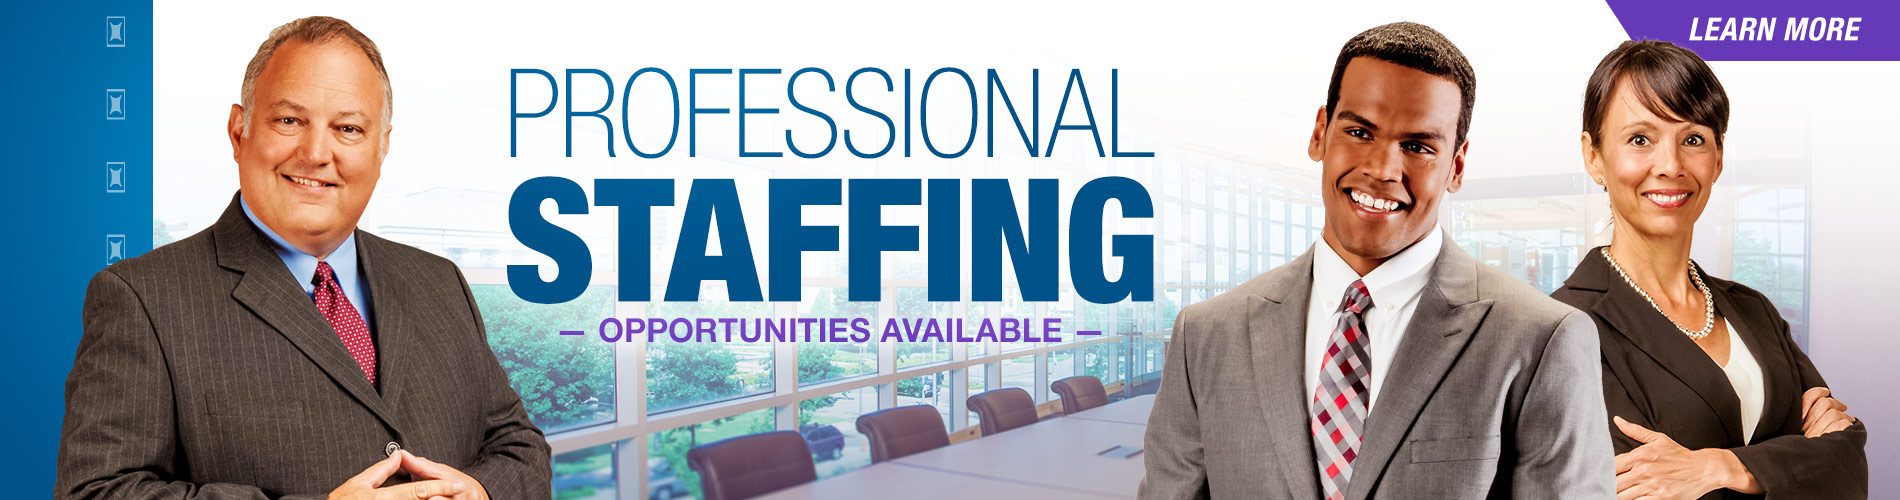 Professional Staffing Banner